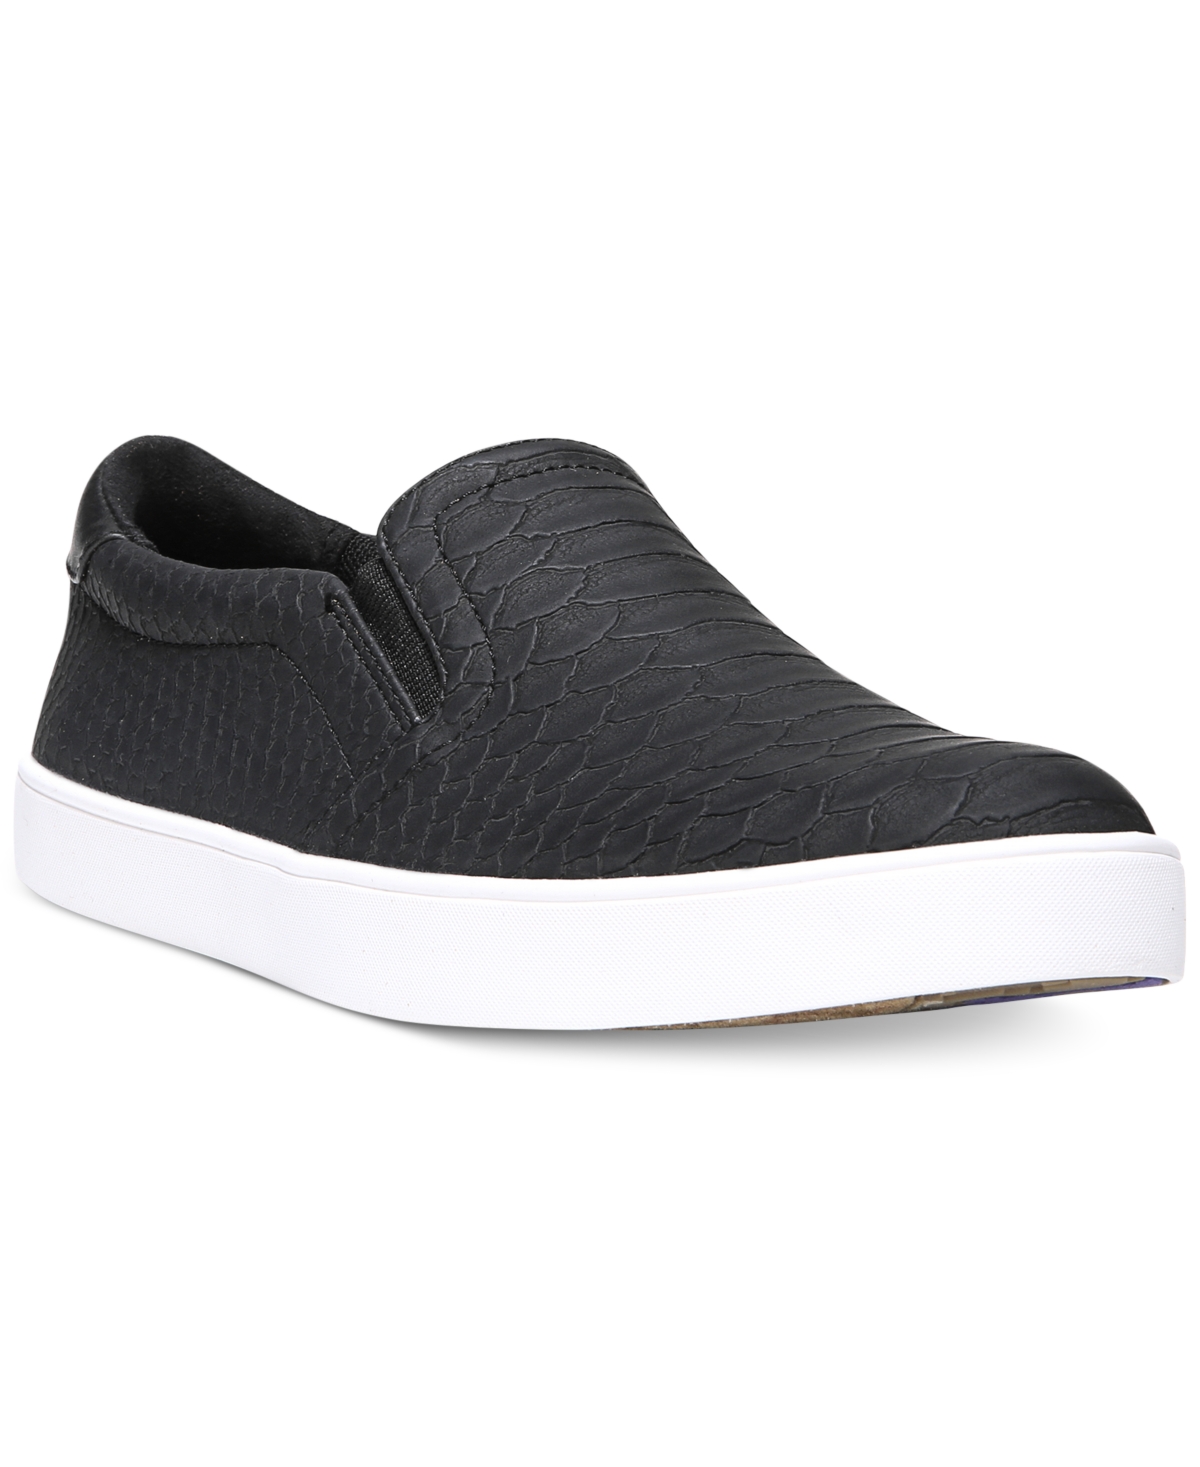 UPC 727679380195 product image for Dr. Scholl's Women's Madison Slip on Sneakers Women's Shoes | upcitemdb.com